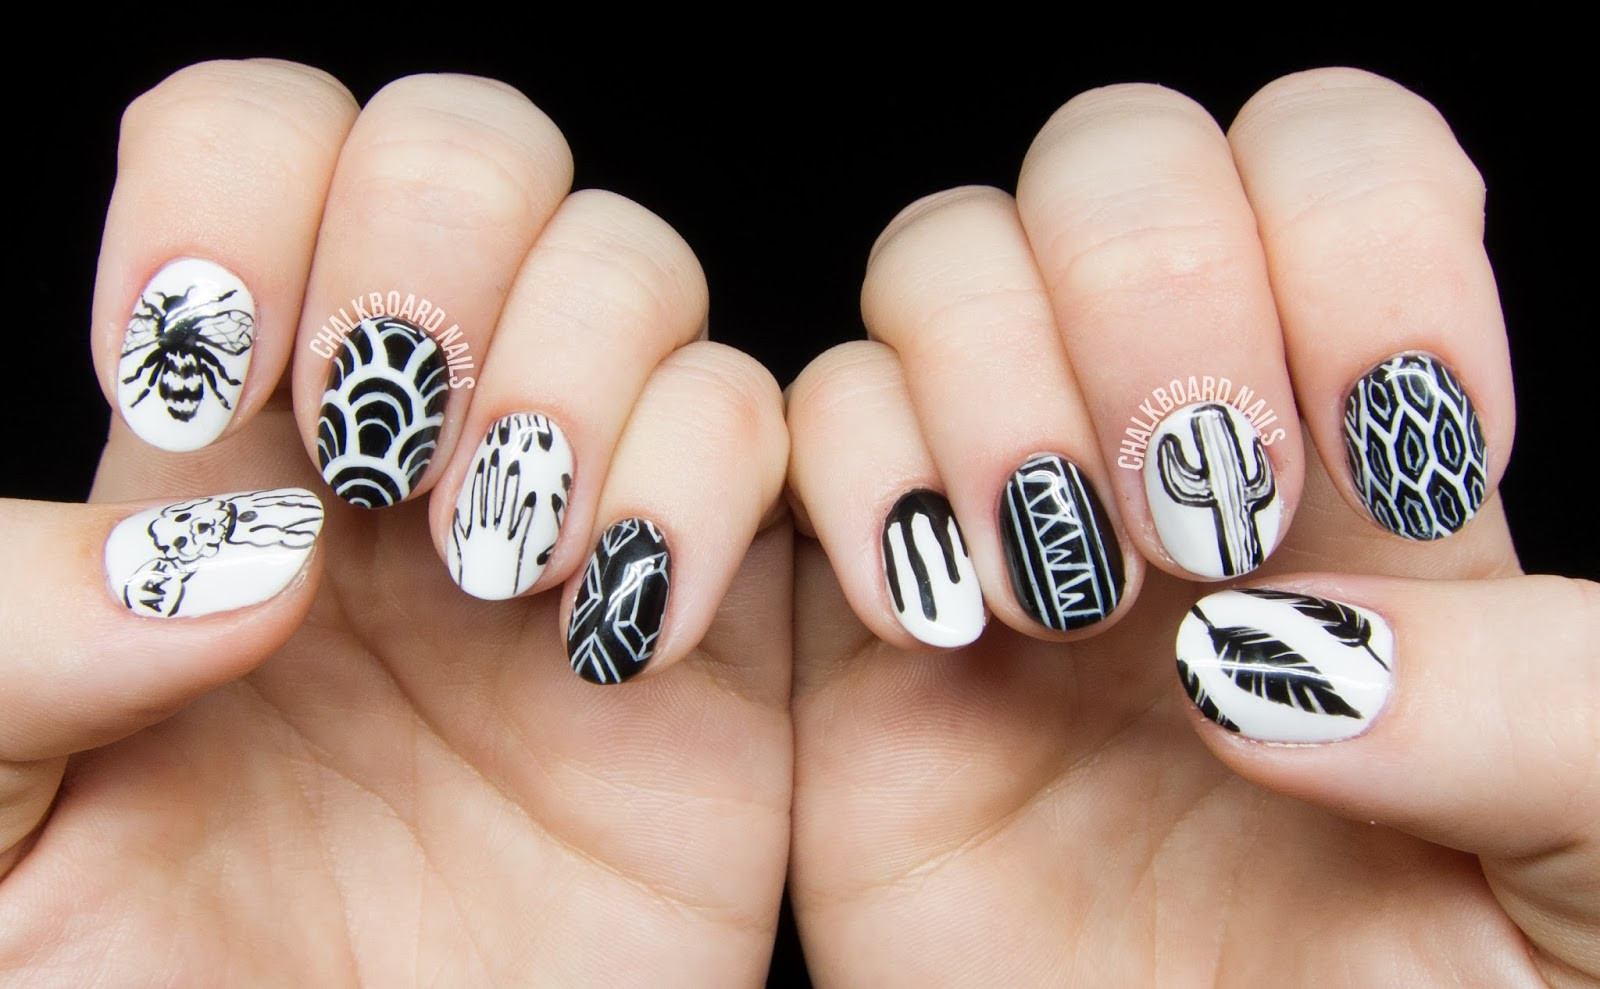 Black And White Nail Art Design
 Personalized Black and White Freehand Nail Art